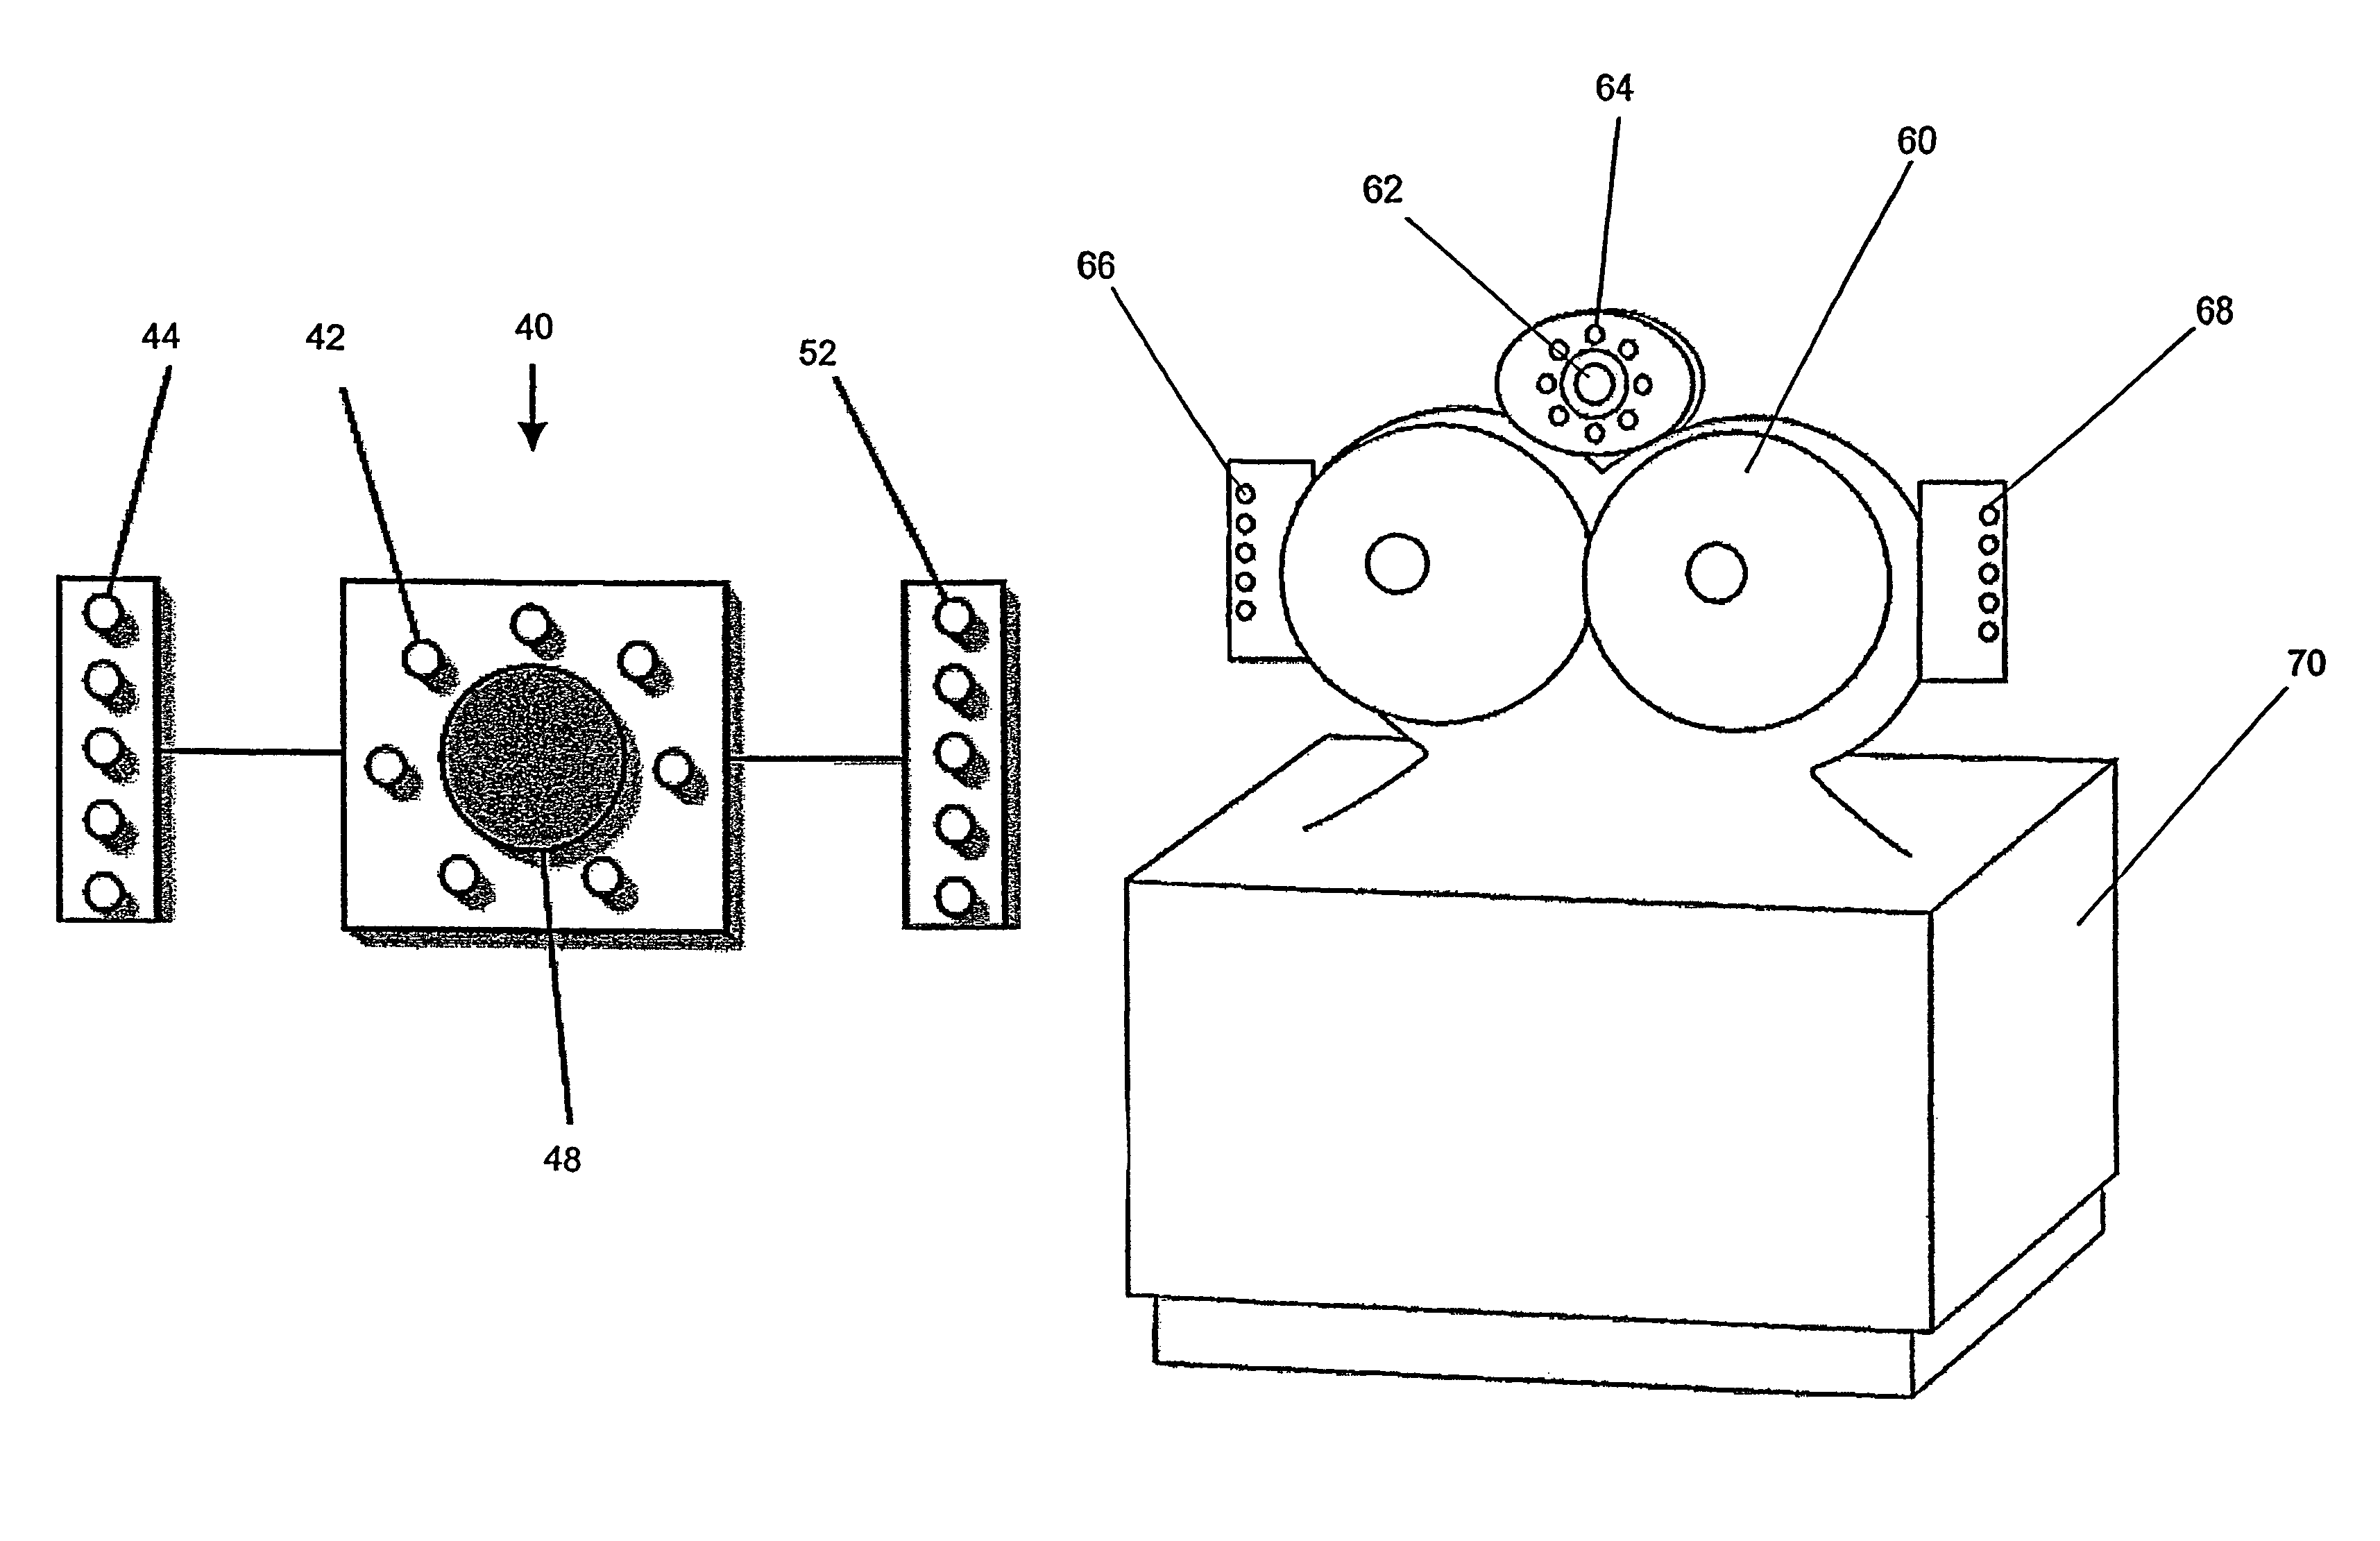 Method and apparatus for communication between humans and devices